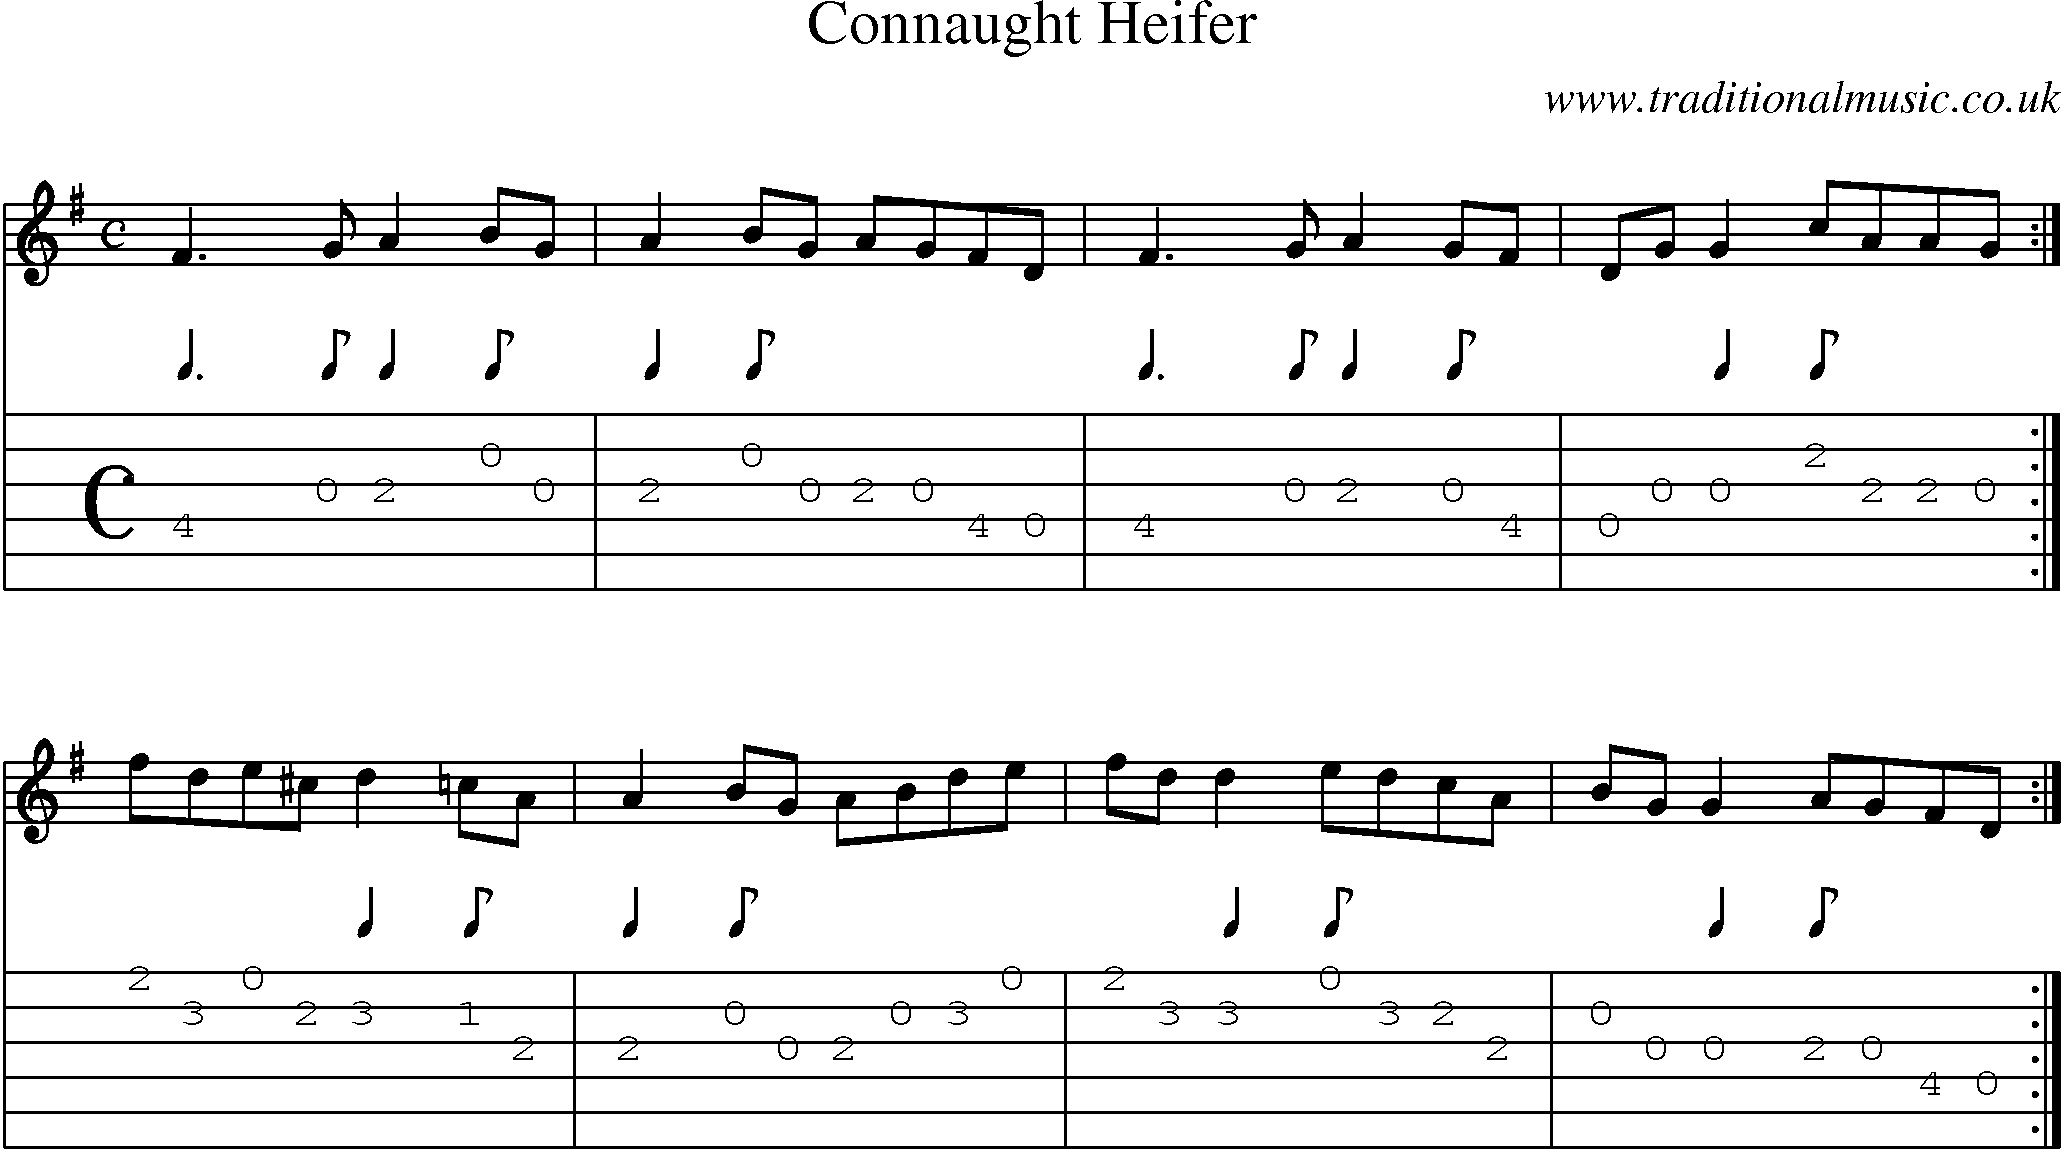 Music Score and Guitar Tabs for Connaught Heifer